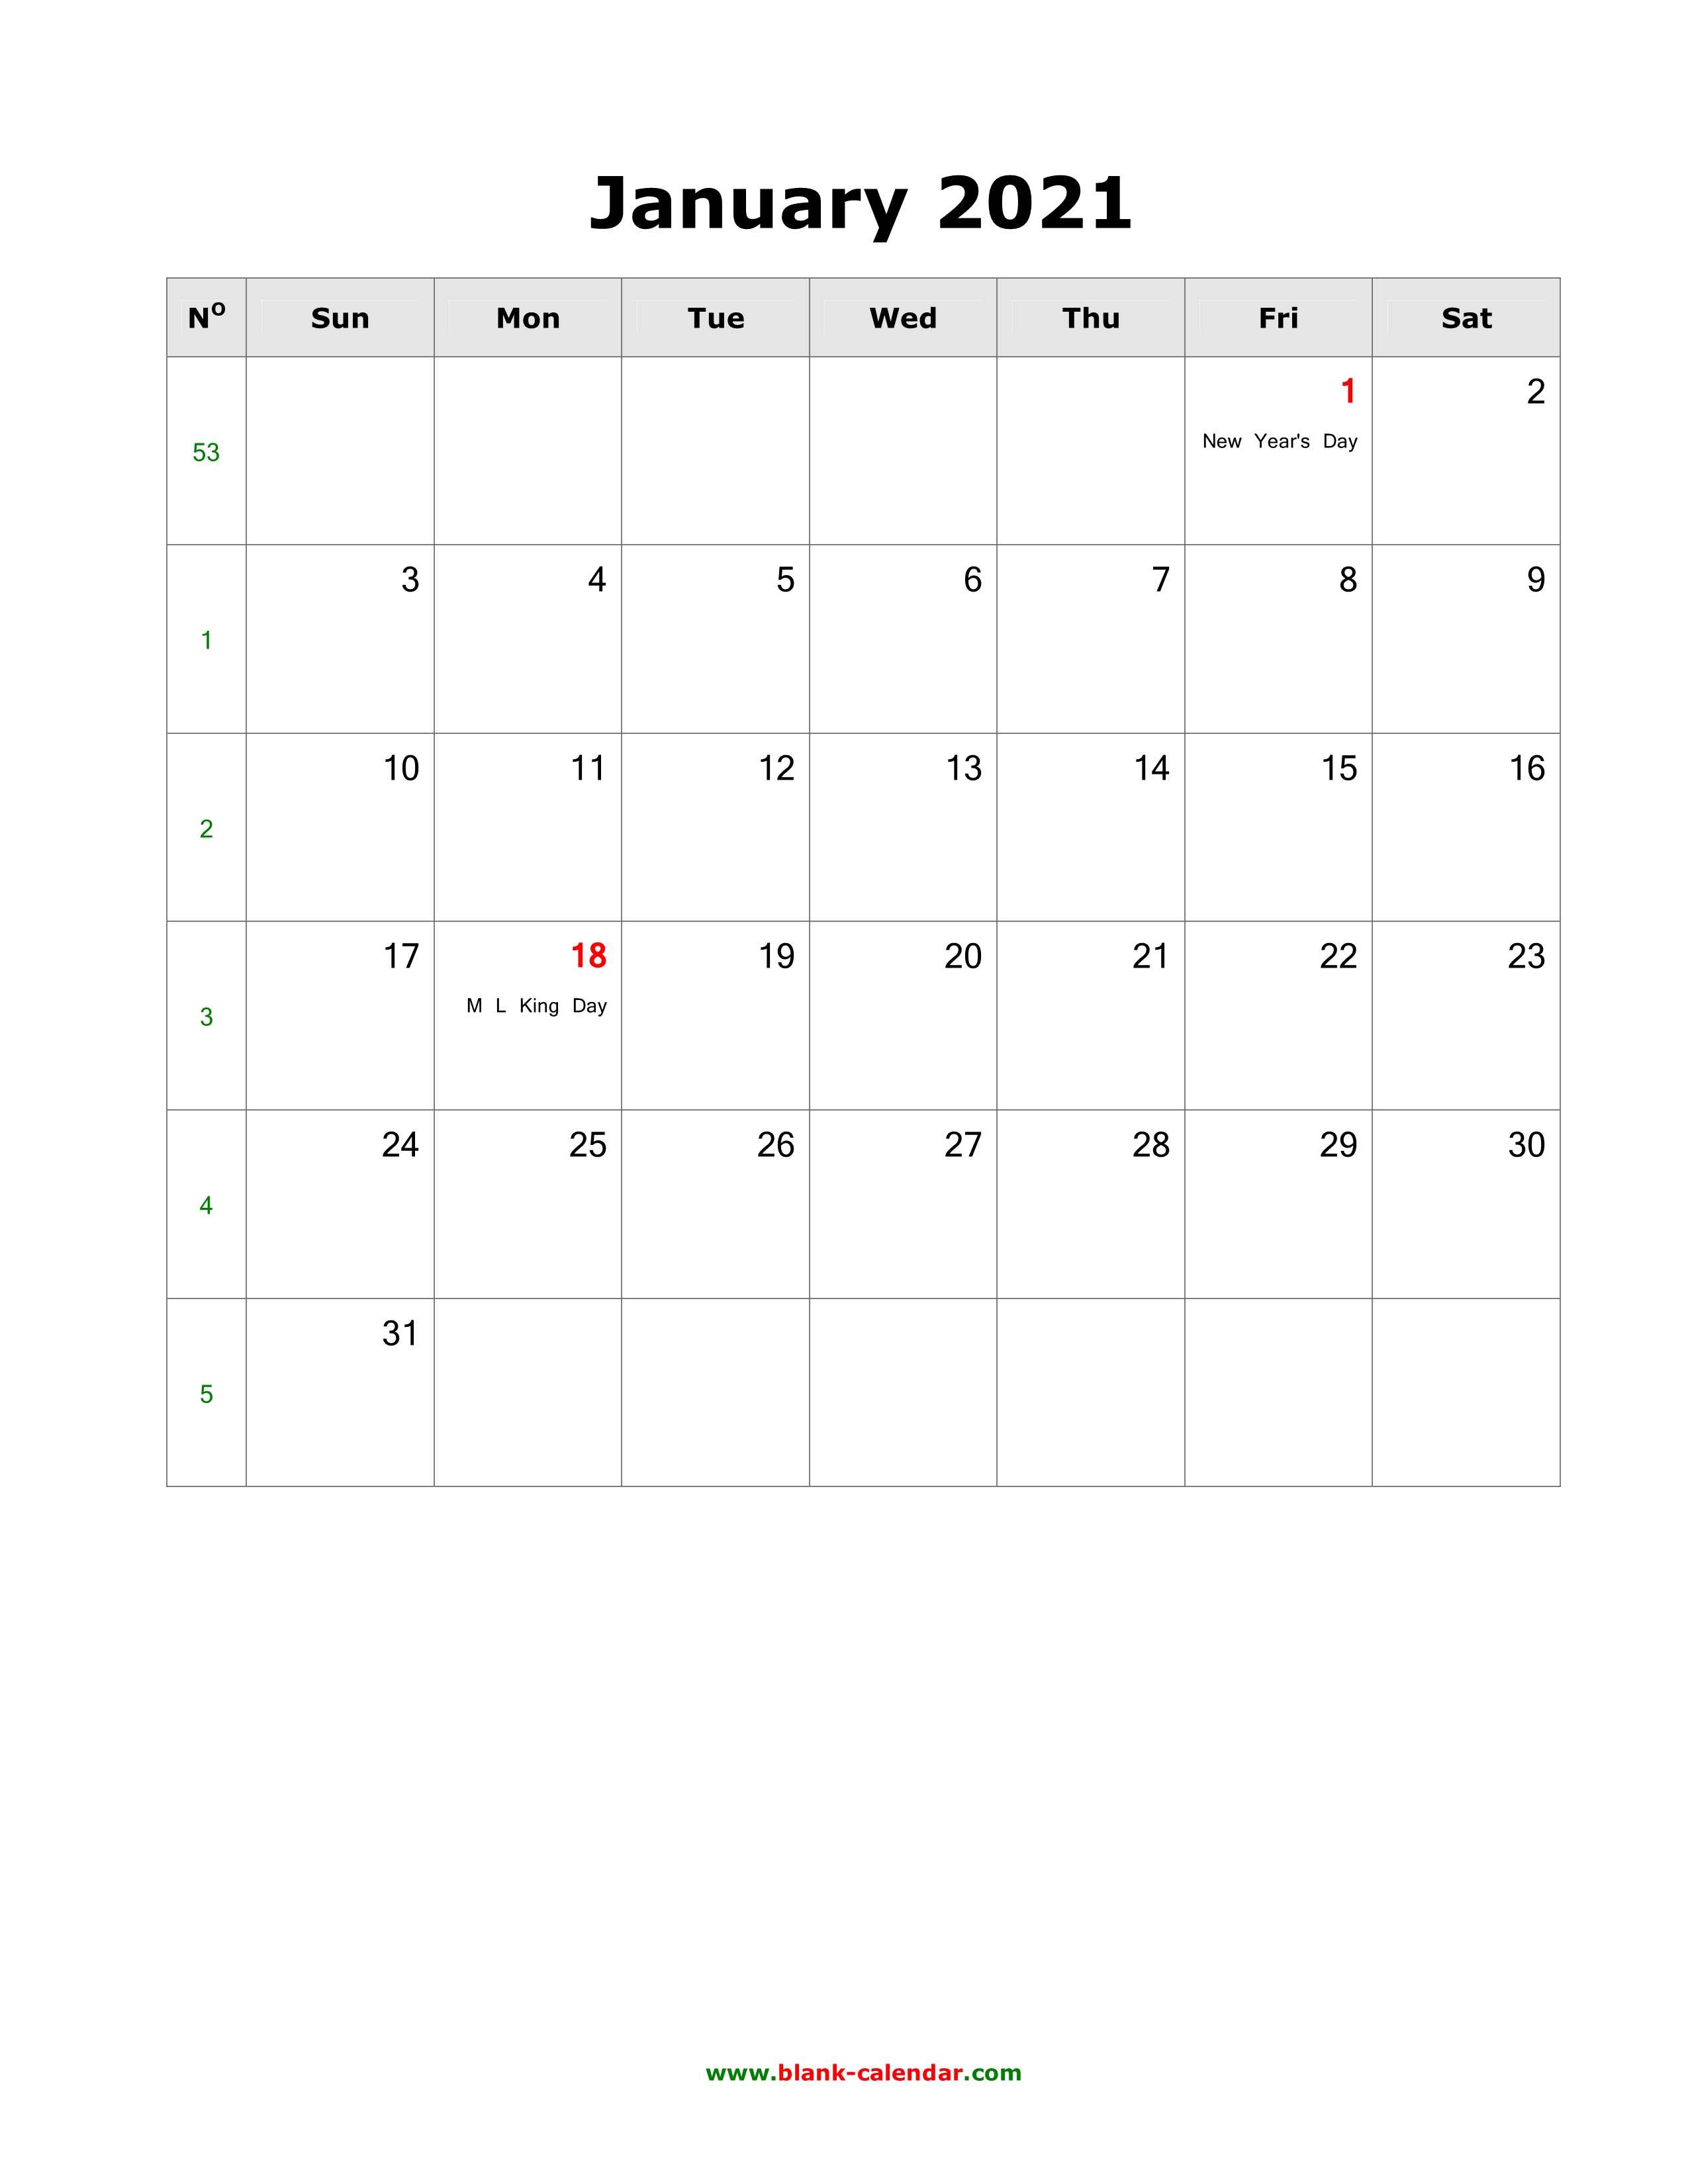 Download January 2021 Blank Calendar With Us Holidays Vertical